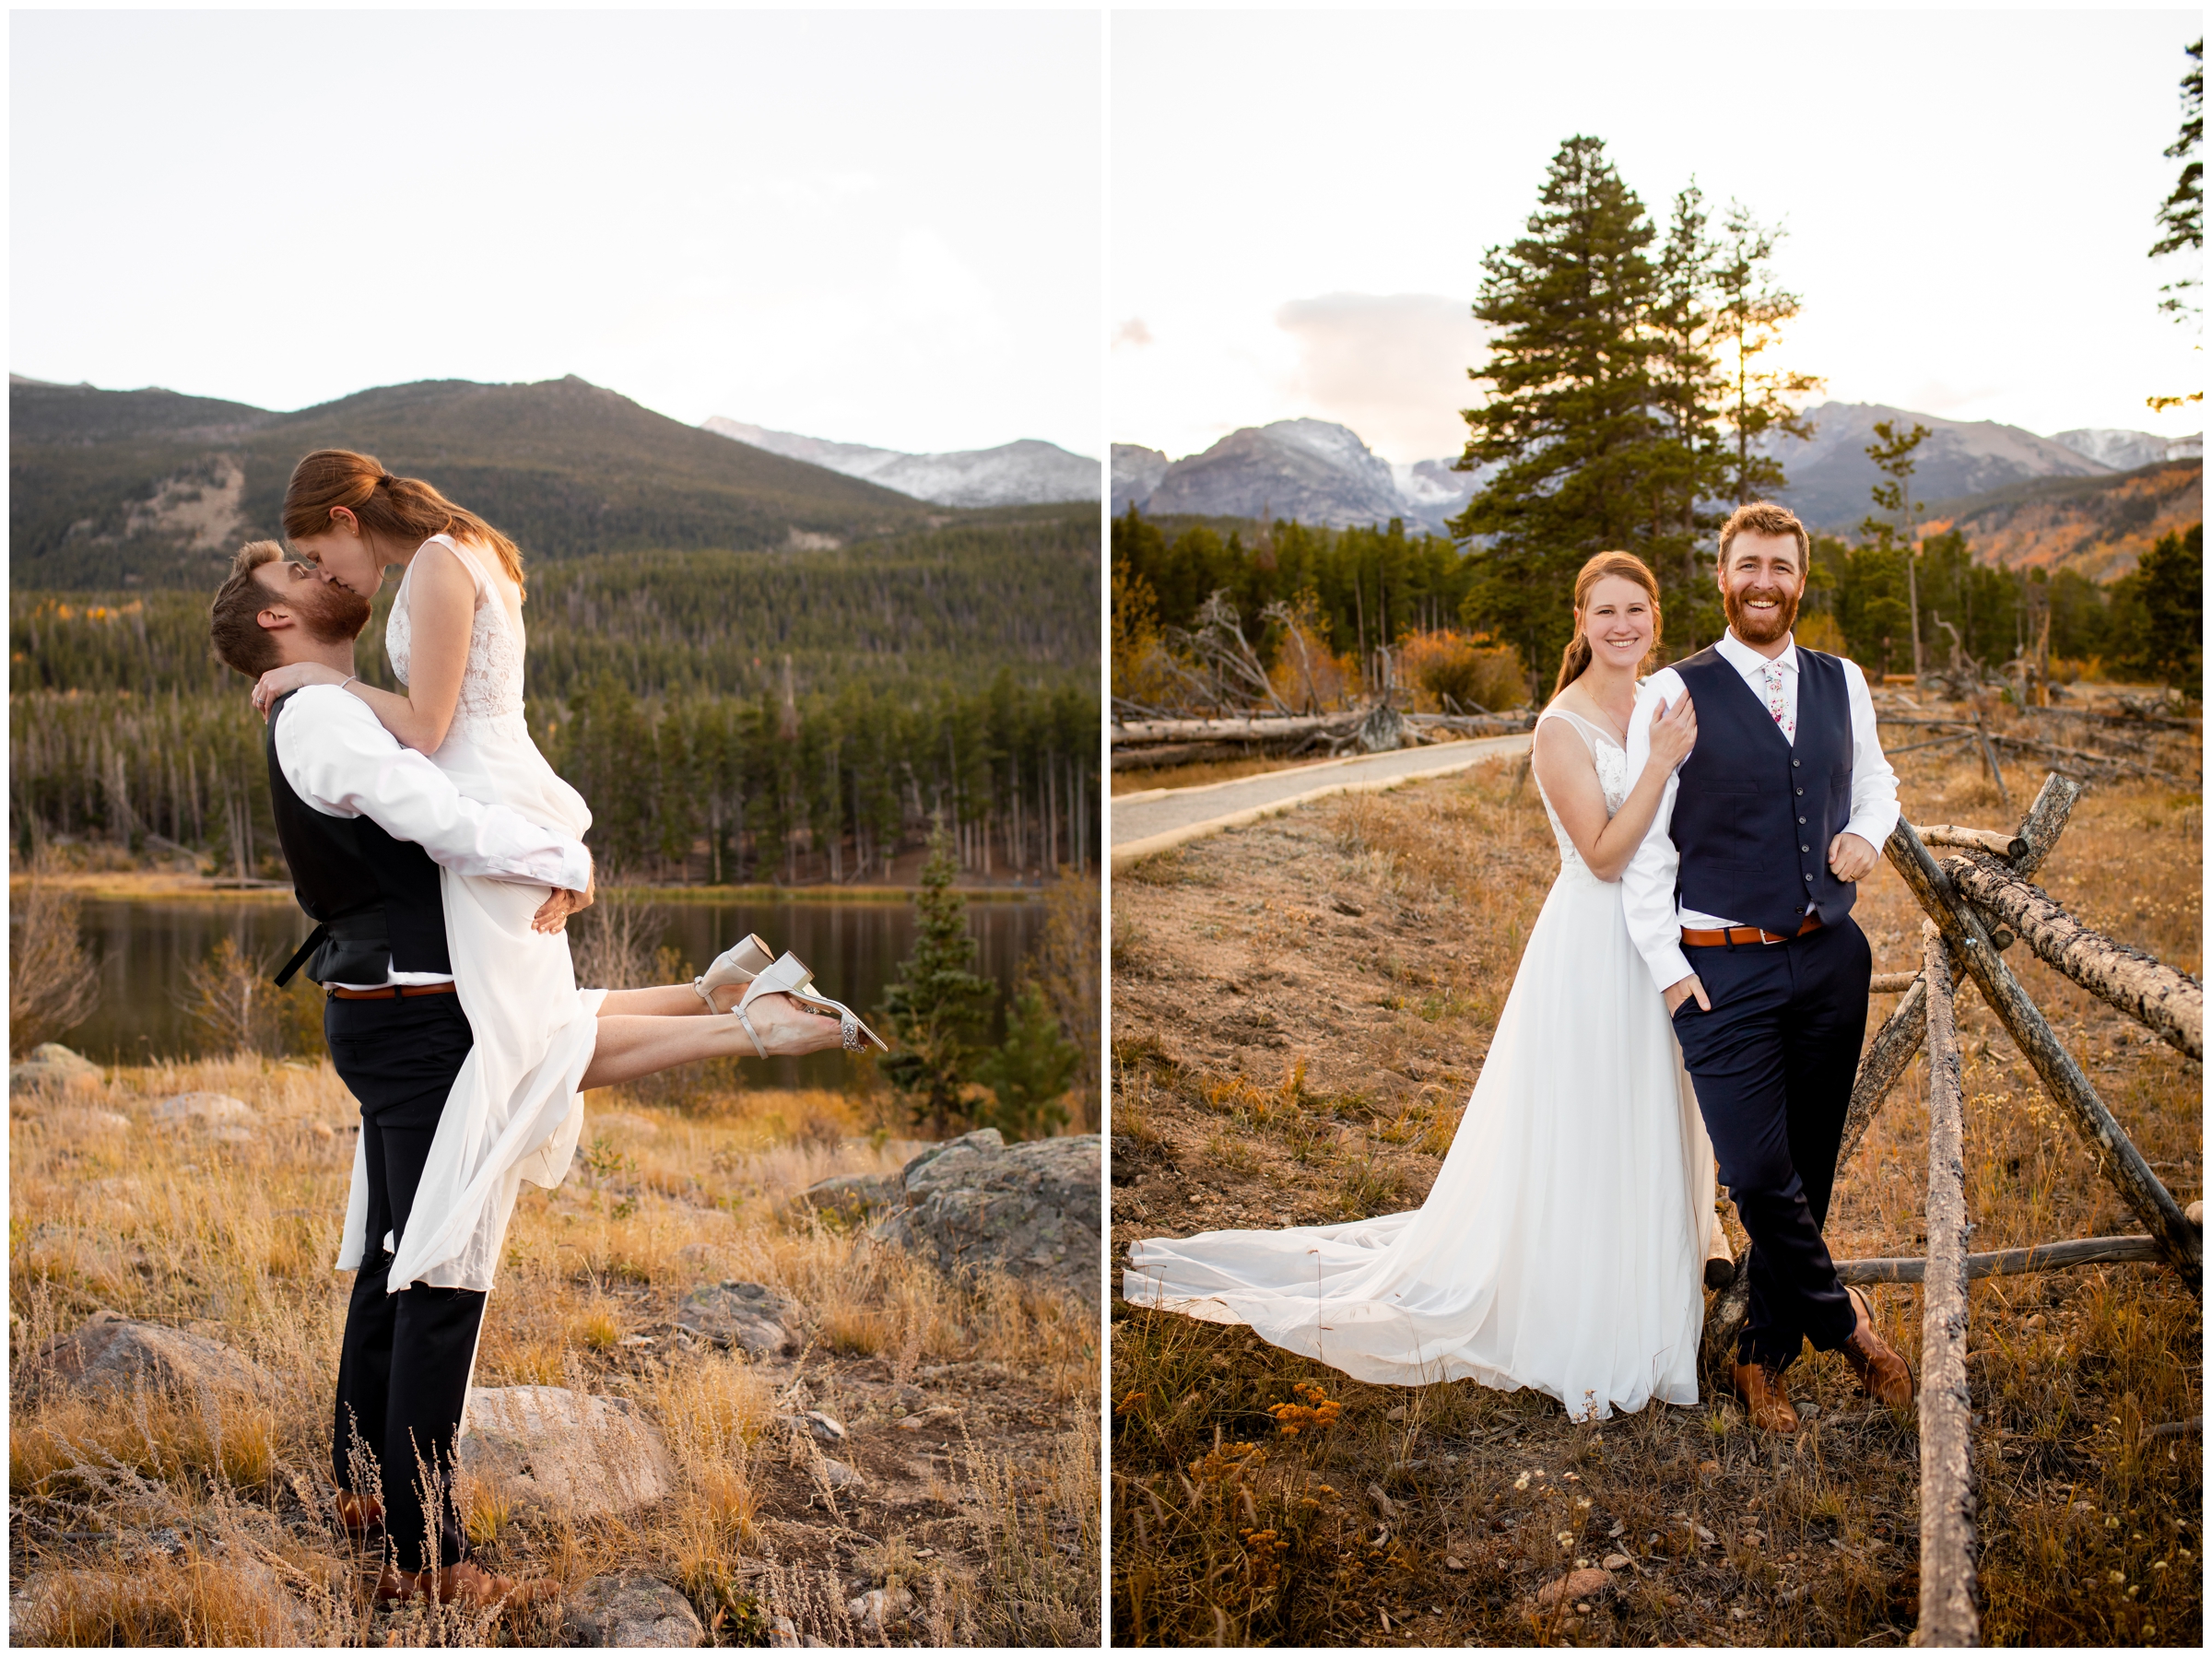 groom lifting bride with mountains in background during Estes Park Colorado wedding photography session